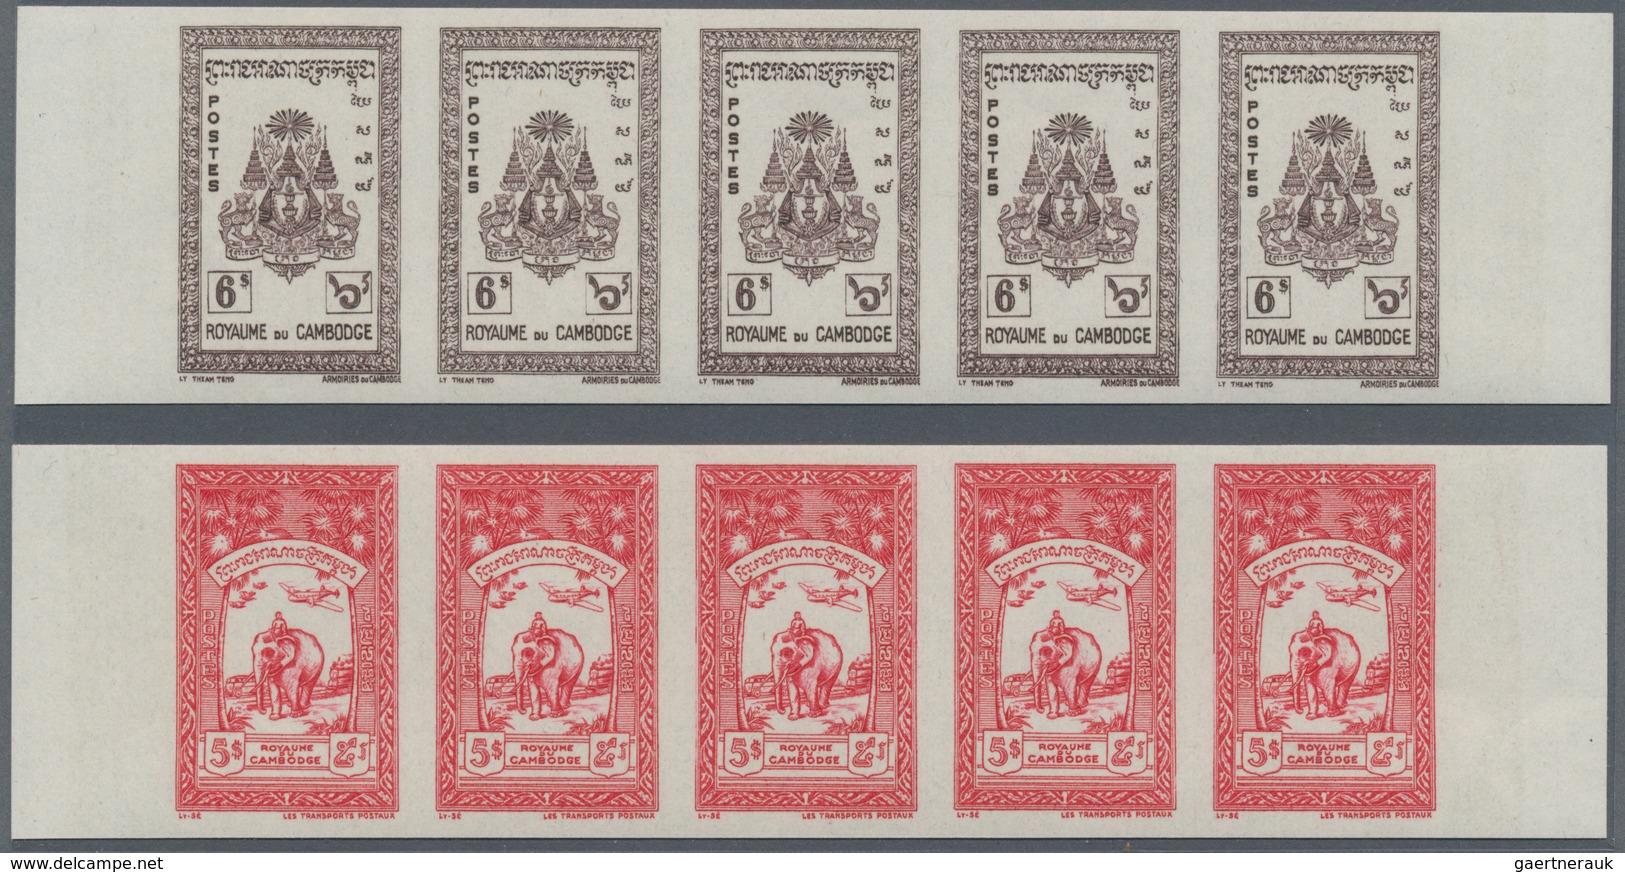 Kambodscha: 1954, definitive issue complete set of 20 (Phnom Daun Penh, Angkor Thom, coat of arms an